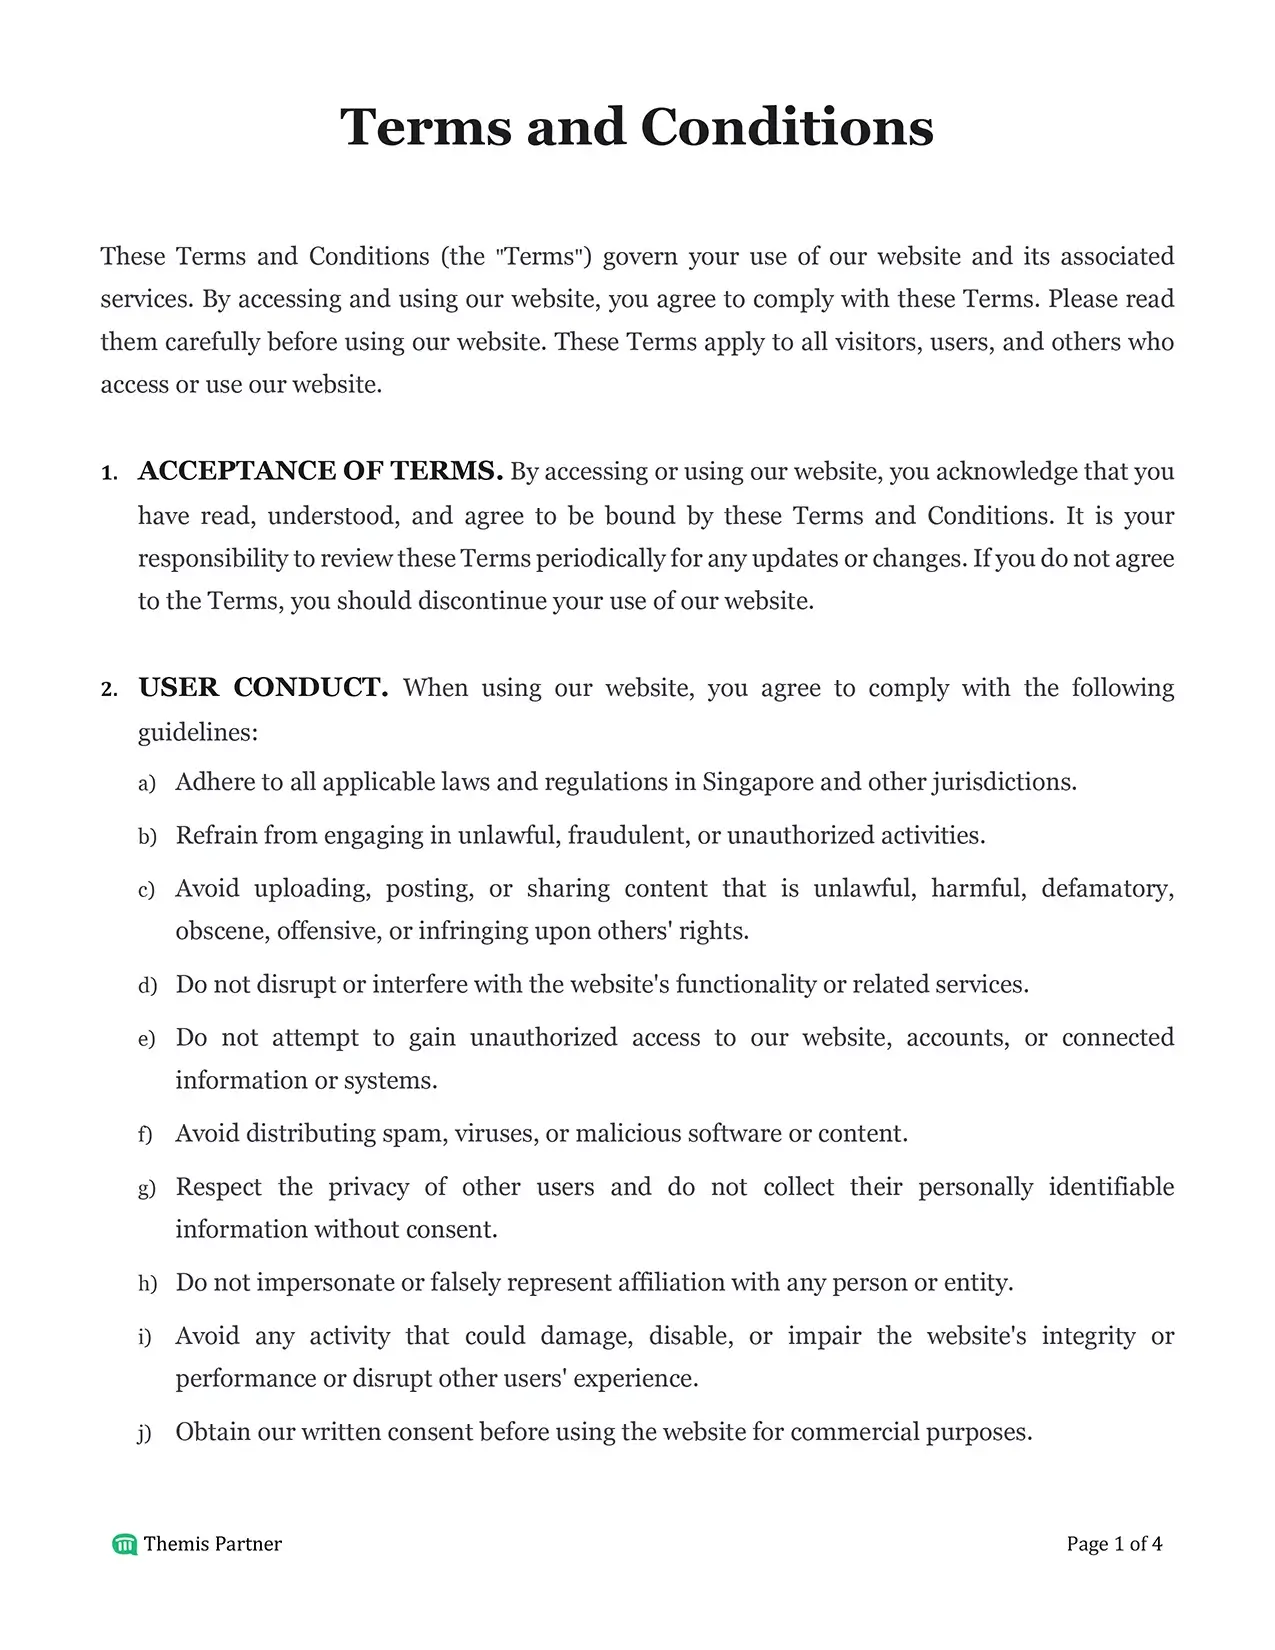 Terms and conditions Singapore 1